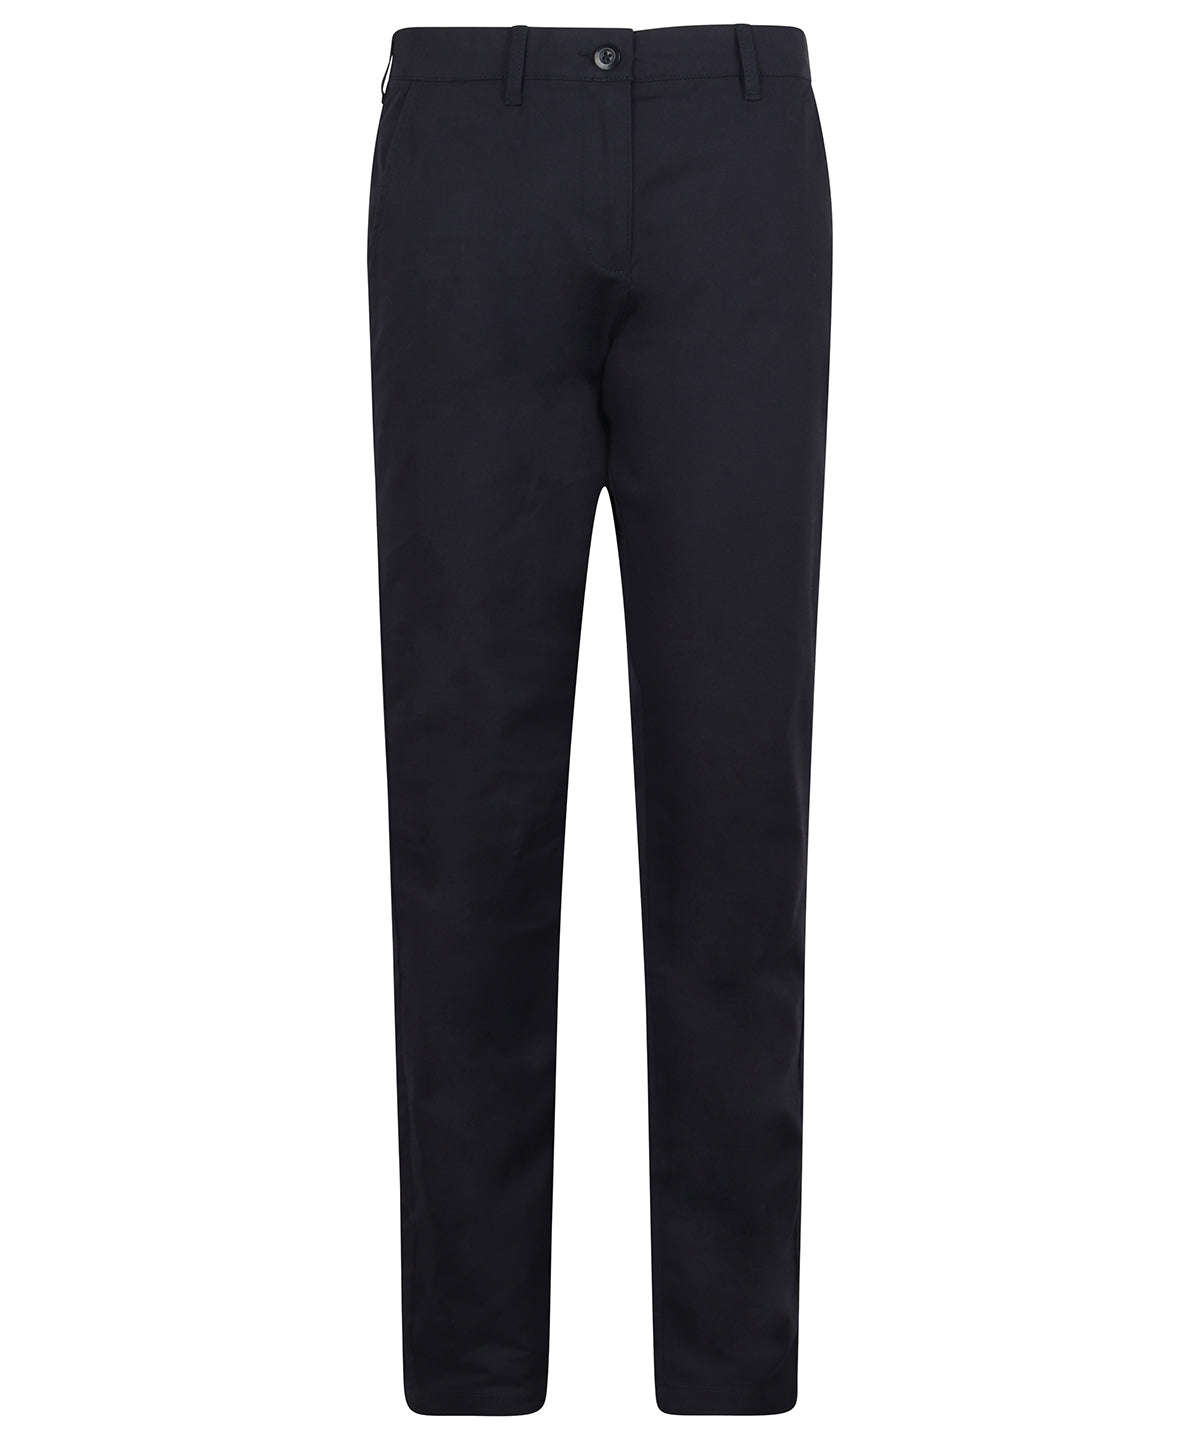 Personalised Trousers - Black Henbury Women's stretch chinos